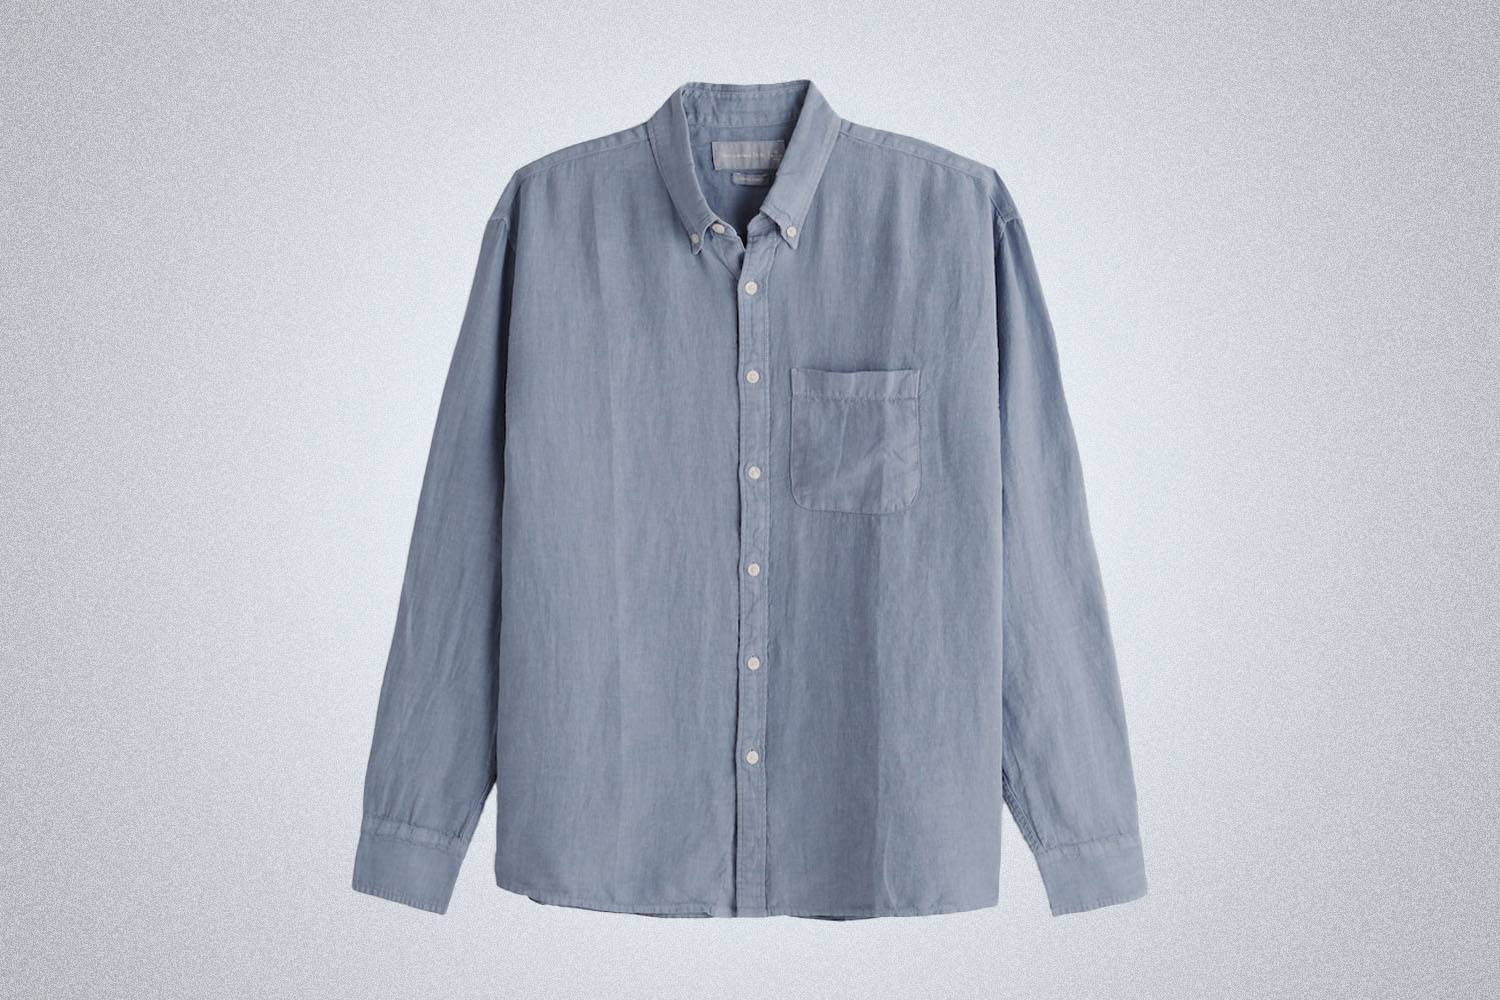 a blue linen shirt on on a grey background